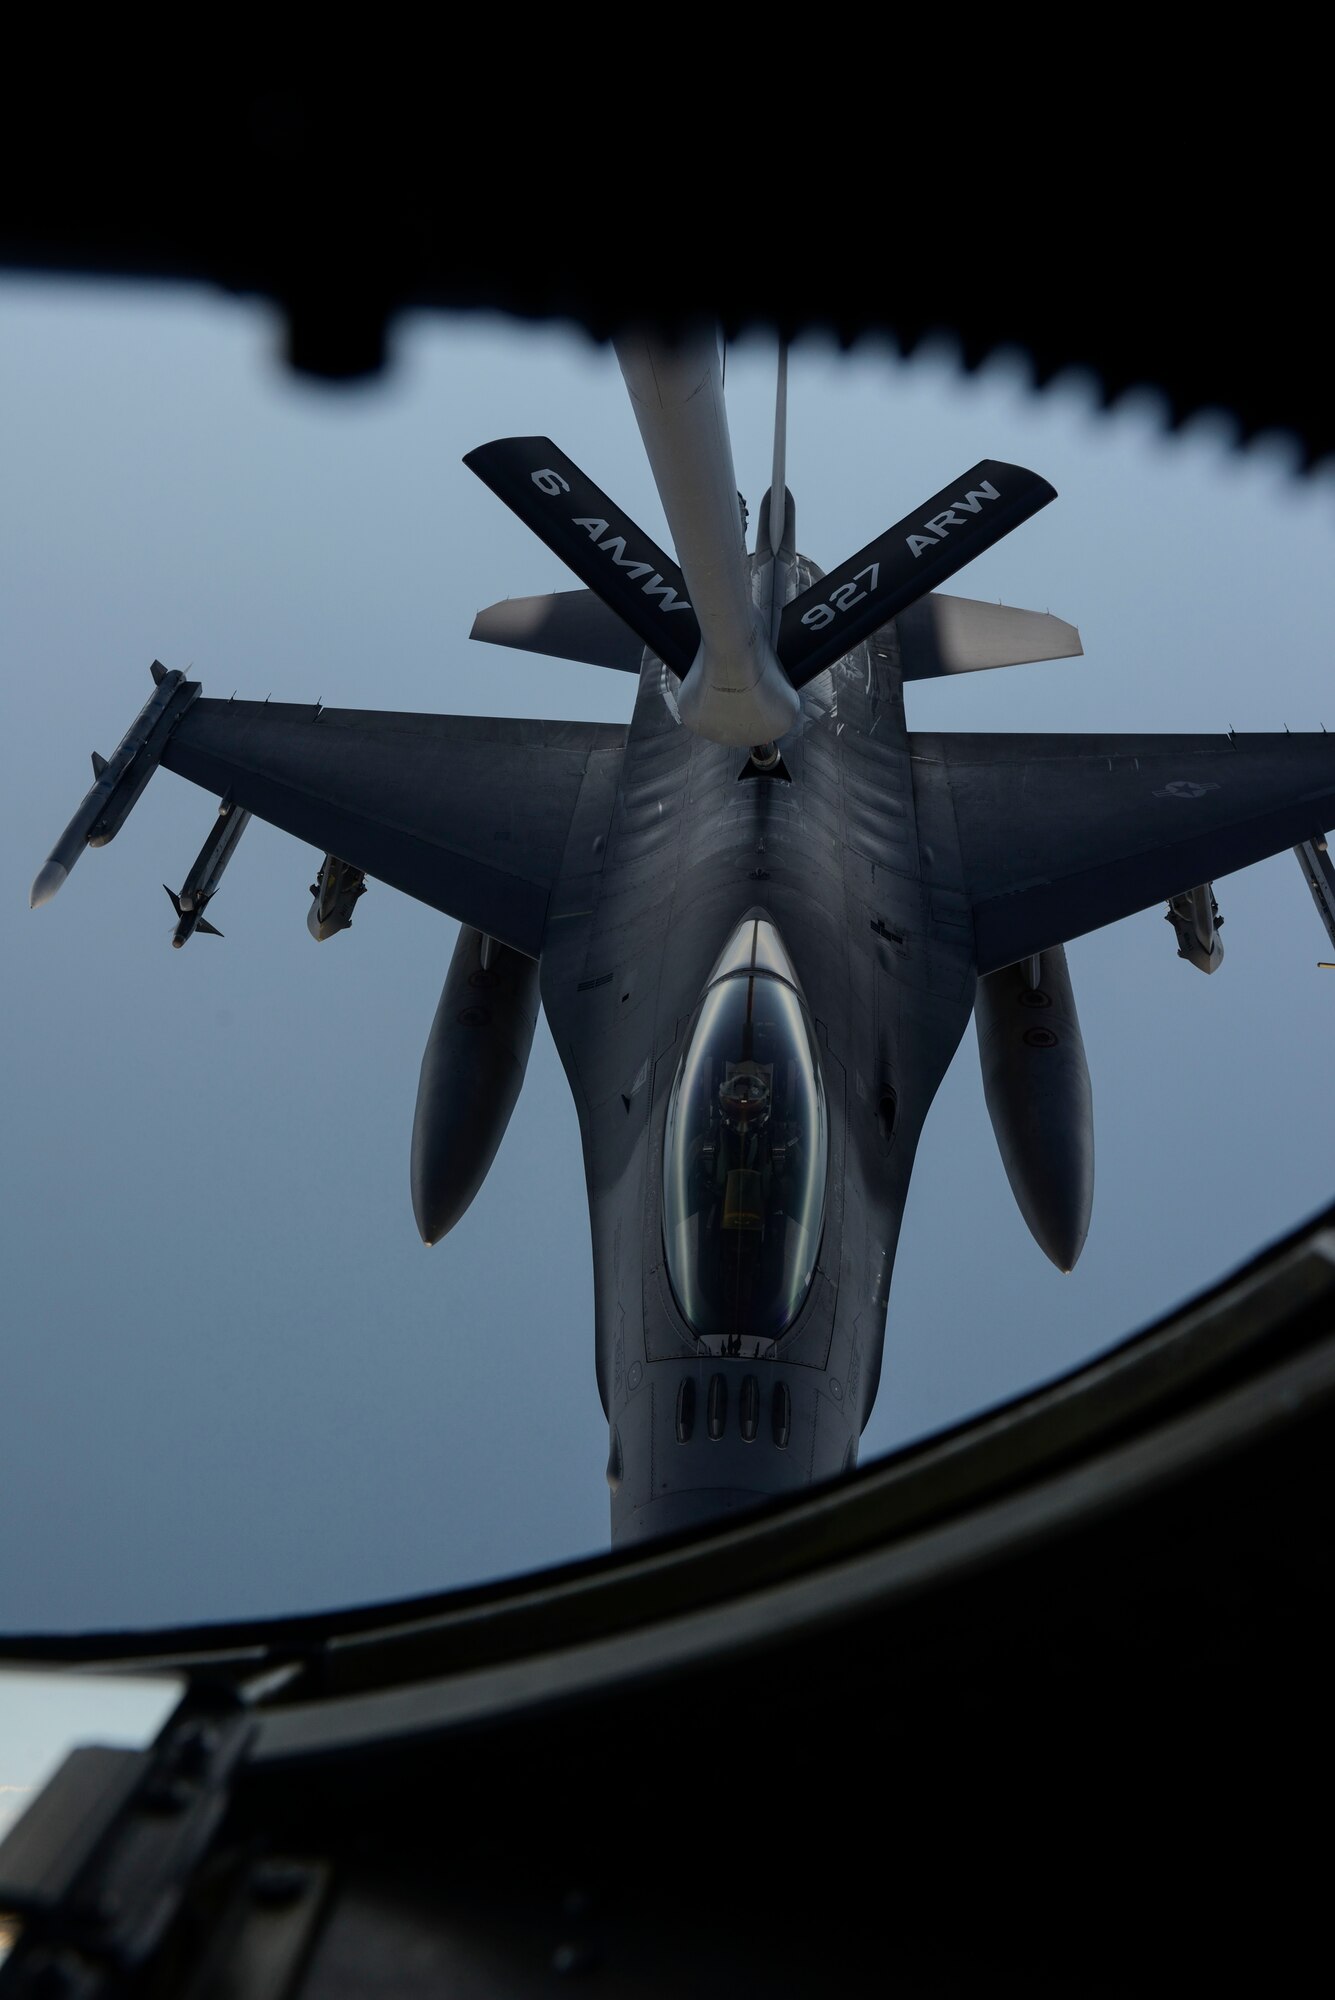 A KC-135 Stratotanker assigned to the 63rd Air Refueling Squadron, 927th Operations Group at MacDill Air Force Base, Fla., refuels an F-16 Fighting Falcon fighter aircraft assigned to the 480th Expeditionary Fighter Squadron, Spangdahlem Air Base, Germany, during a flying training deployment at Souda Bay, Greece, Feb. 2, 2016. Approximately 300 personnel and 18 F-16s from the 52nd Fighter Wing at Spangdahlem Air Base, Germany, will support the FTD as part of U.S. Air Forces in Europe-Air Forces Africa's Forward Ready Now stance. (U.S. Air Force photo by Staff Sgt. Christopher Ruano/Released)